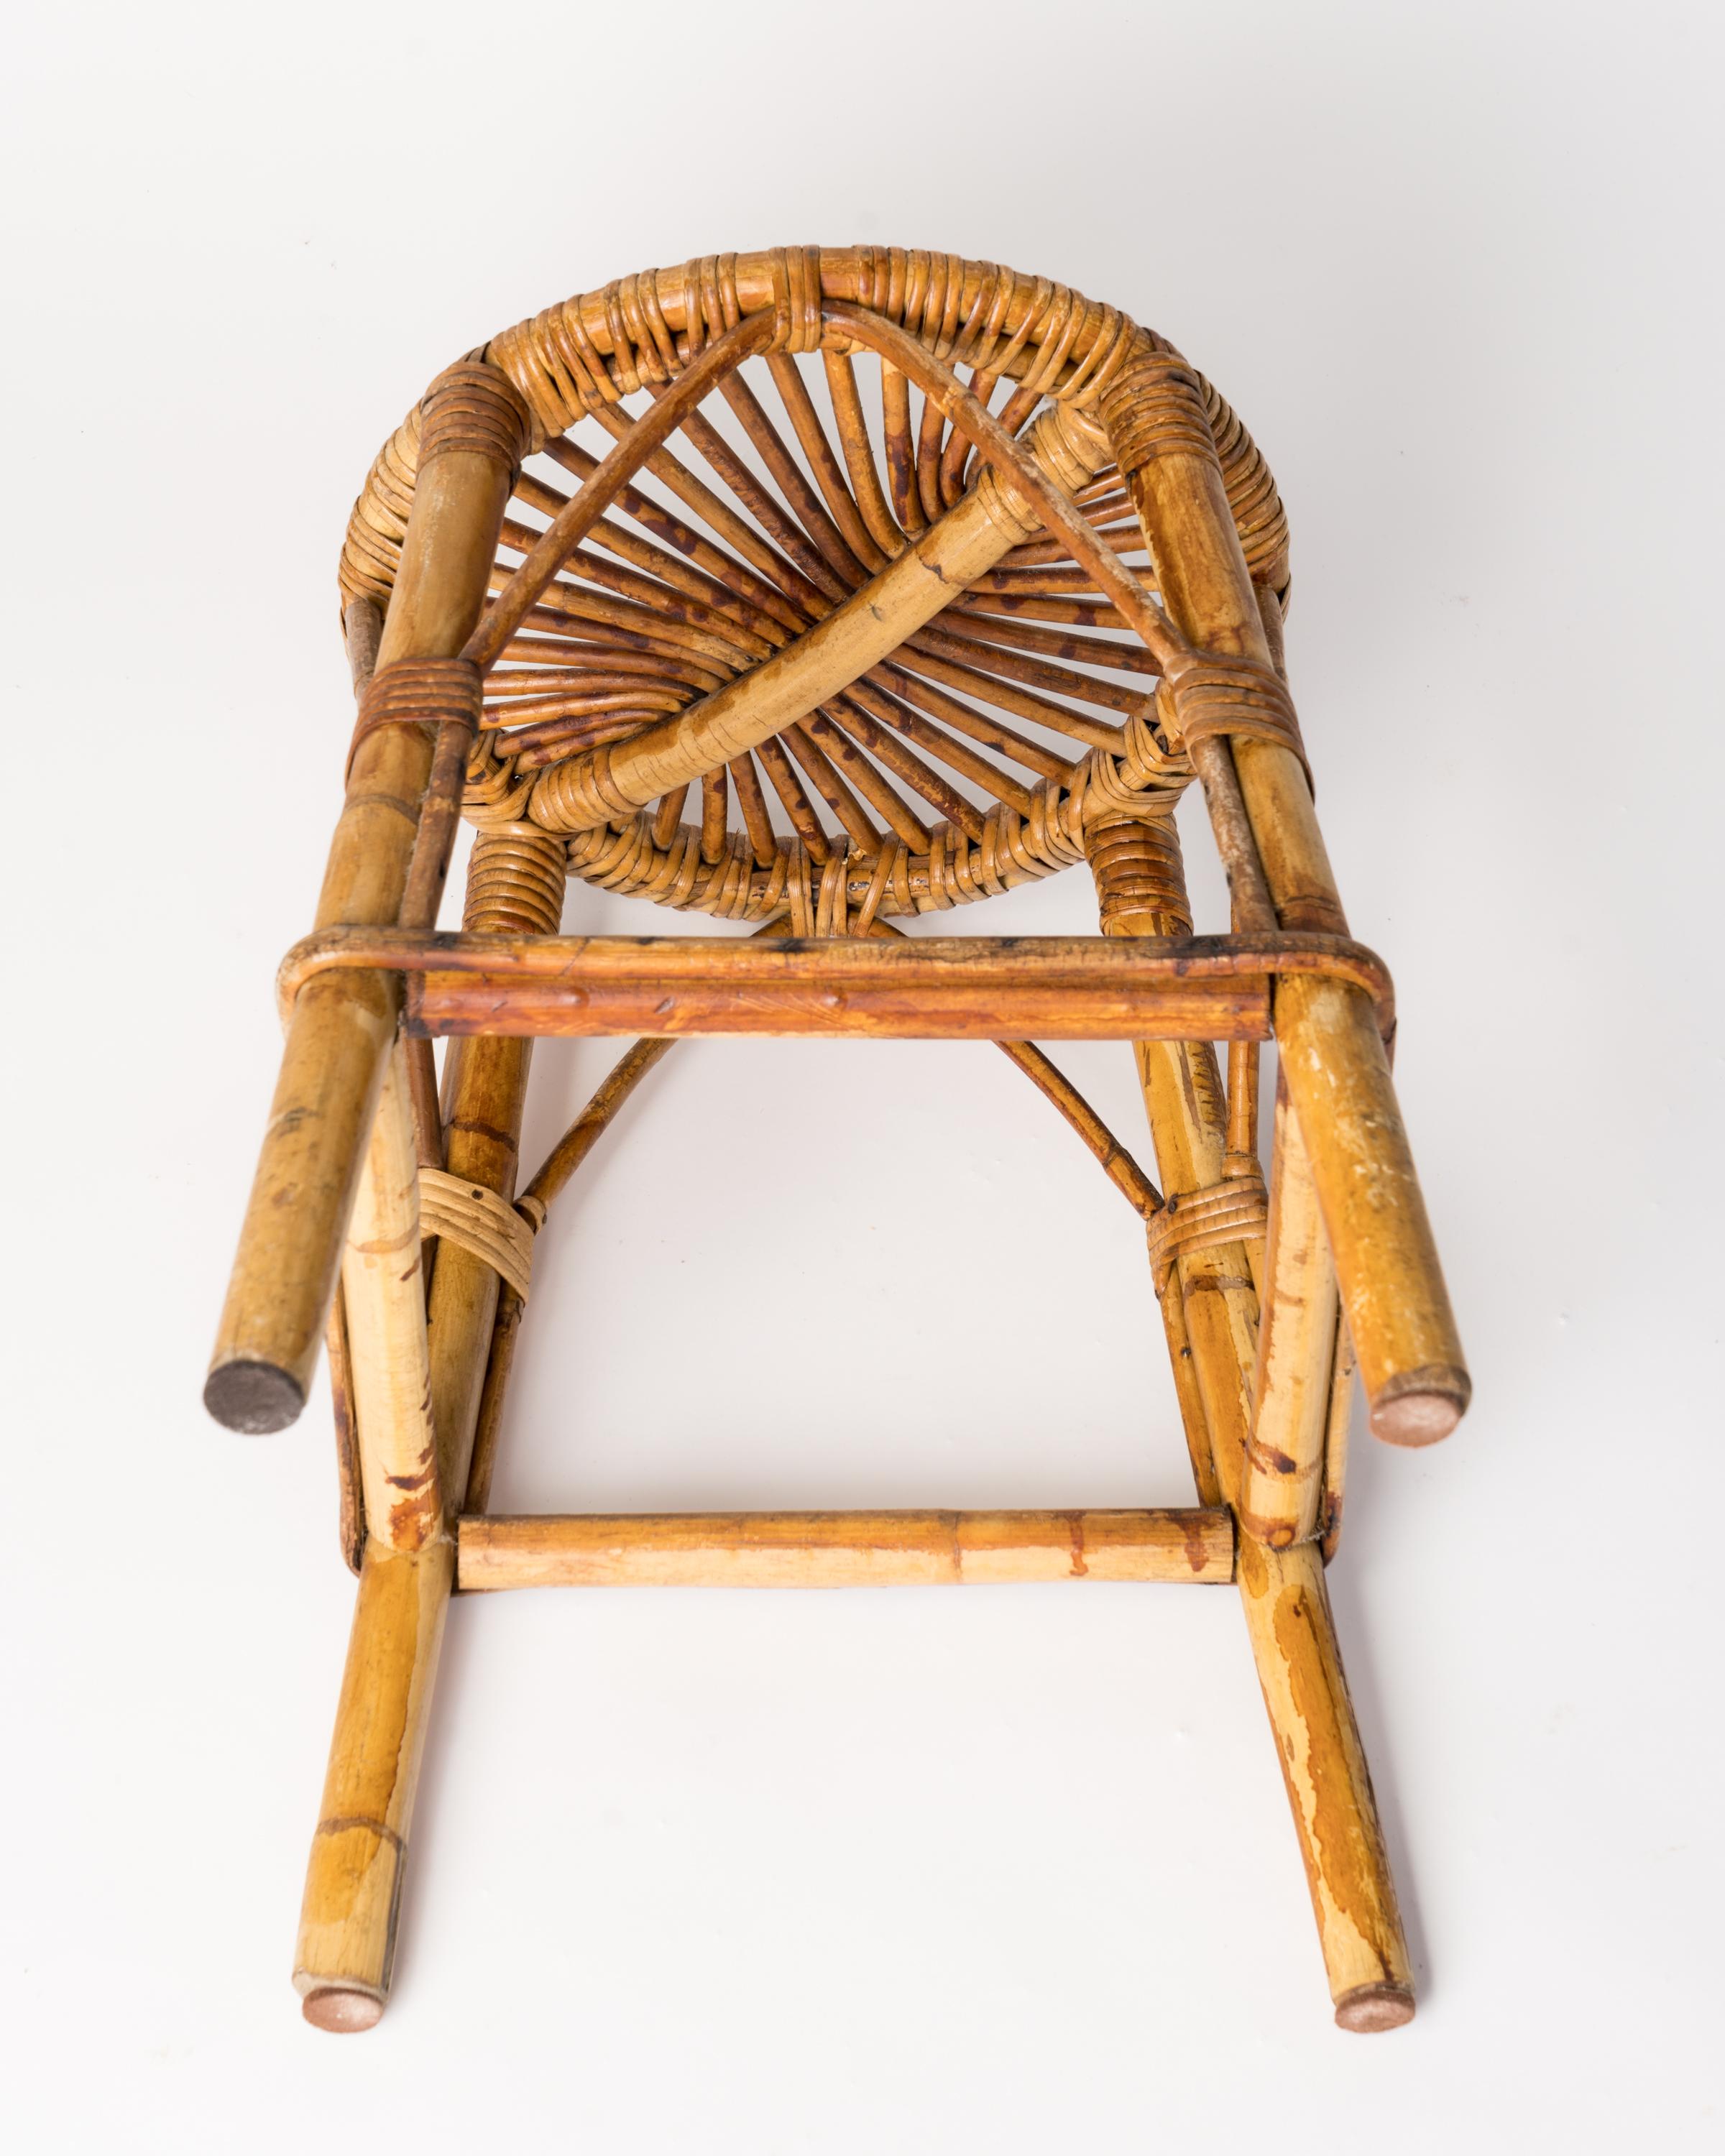 Modernist four legged rattan & wicker stool. In the style of Louis Sognot.
Fair vintage condition.
This stool will ship from France and can be returned to either France or to an upstate NY location.
Price does not include shipping nor possible